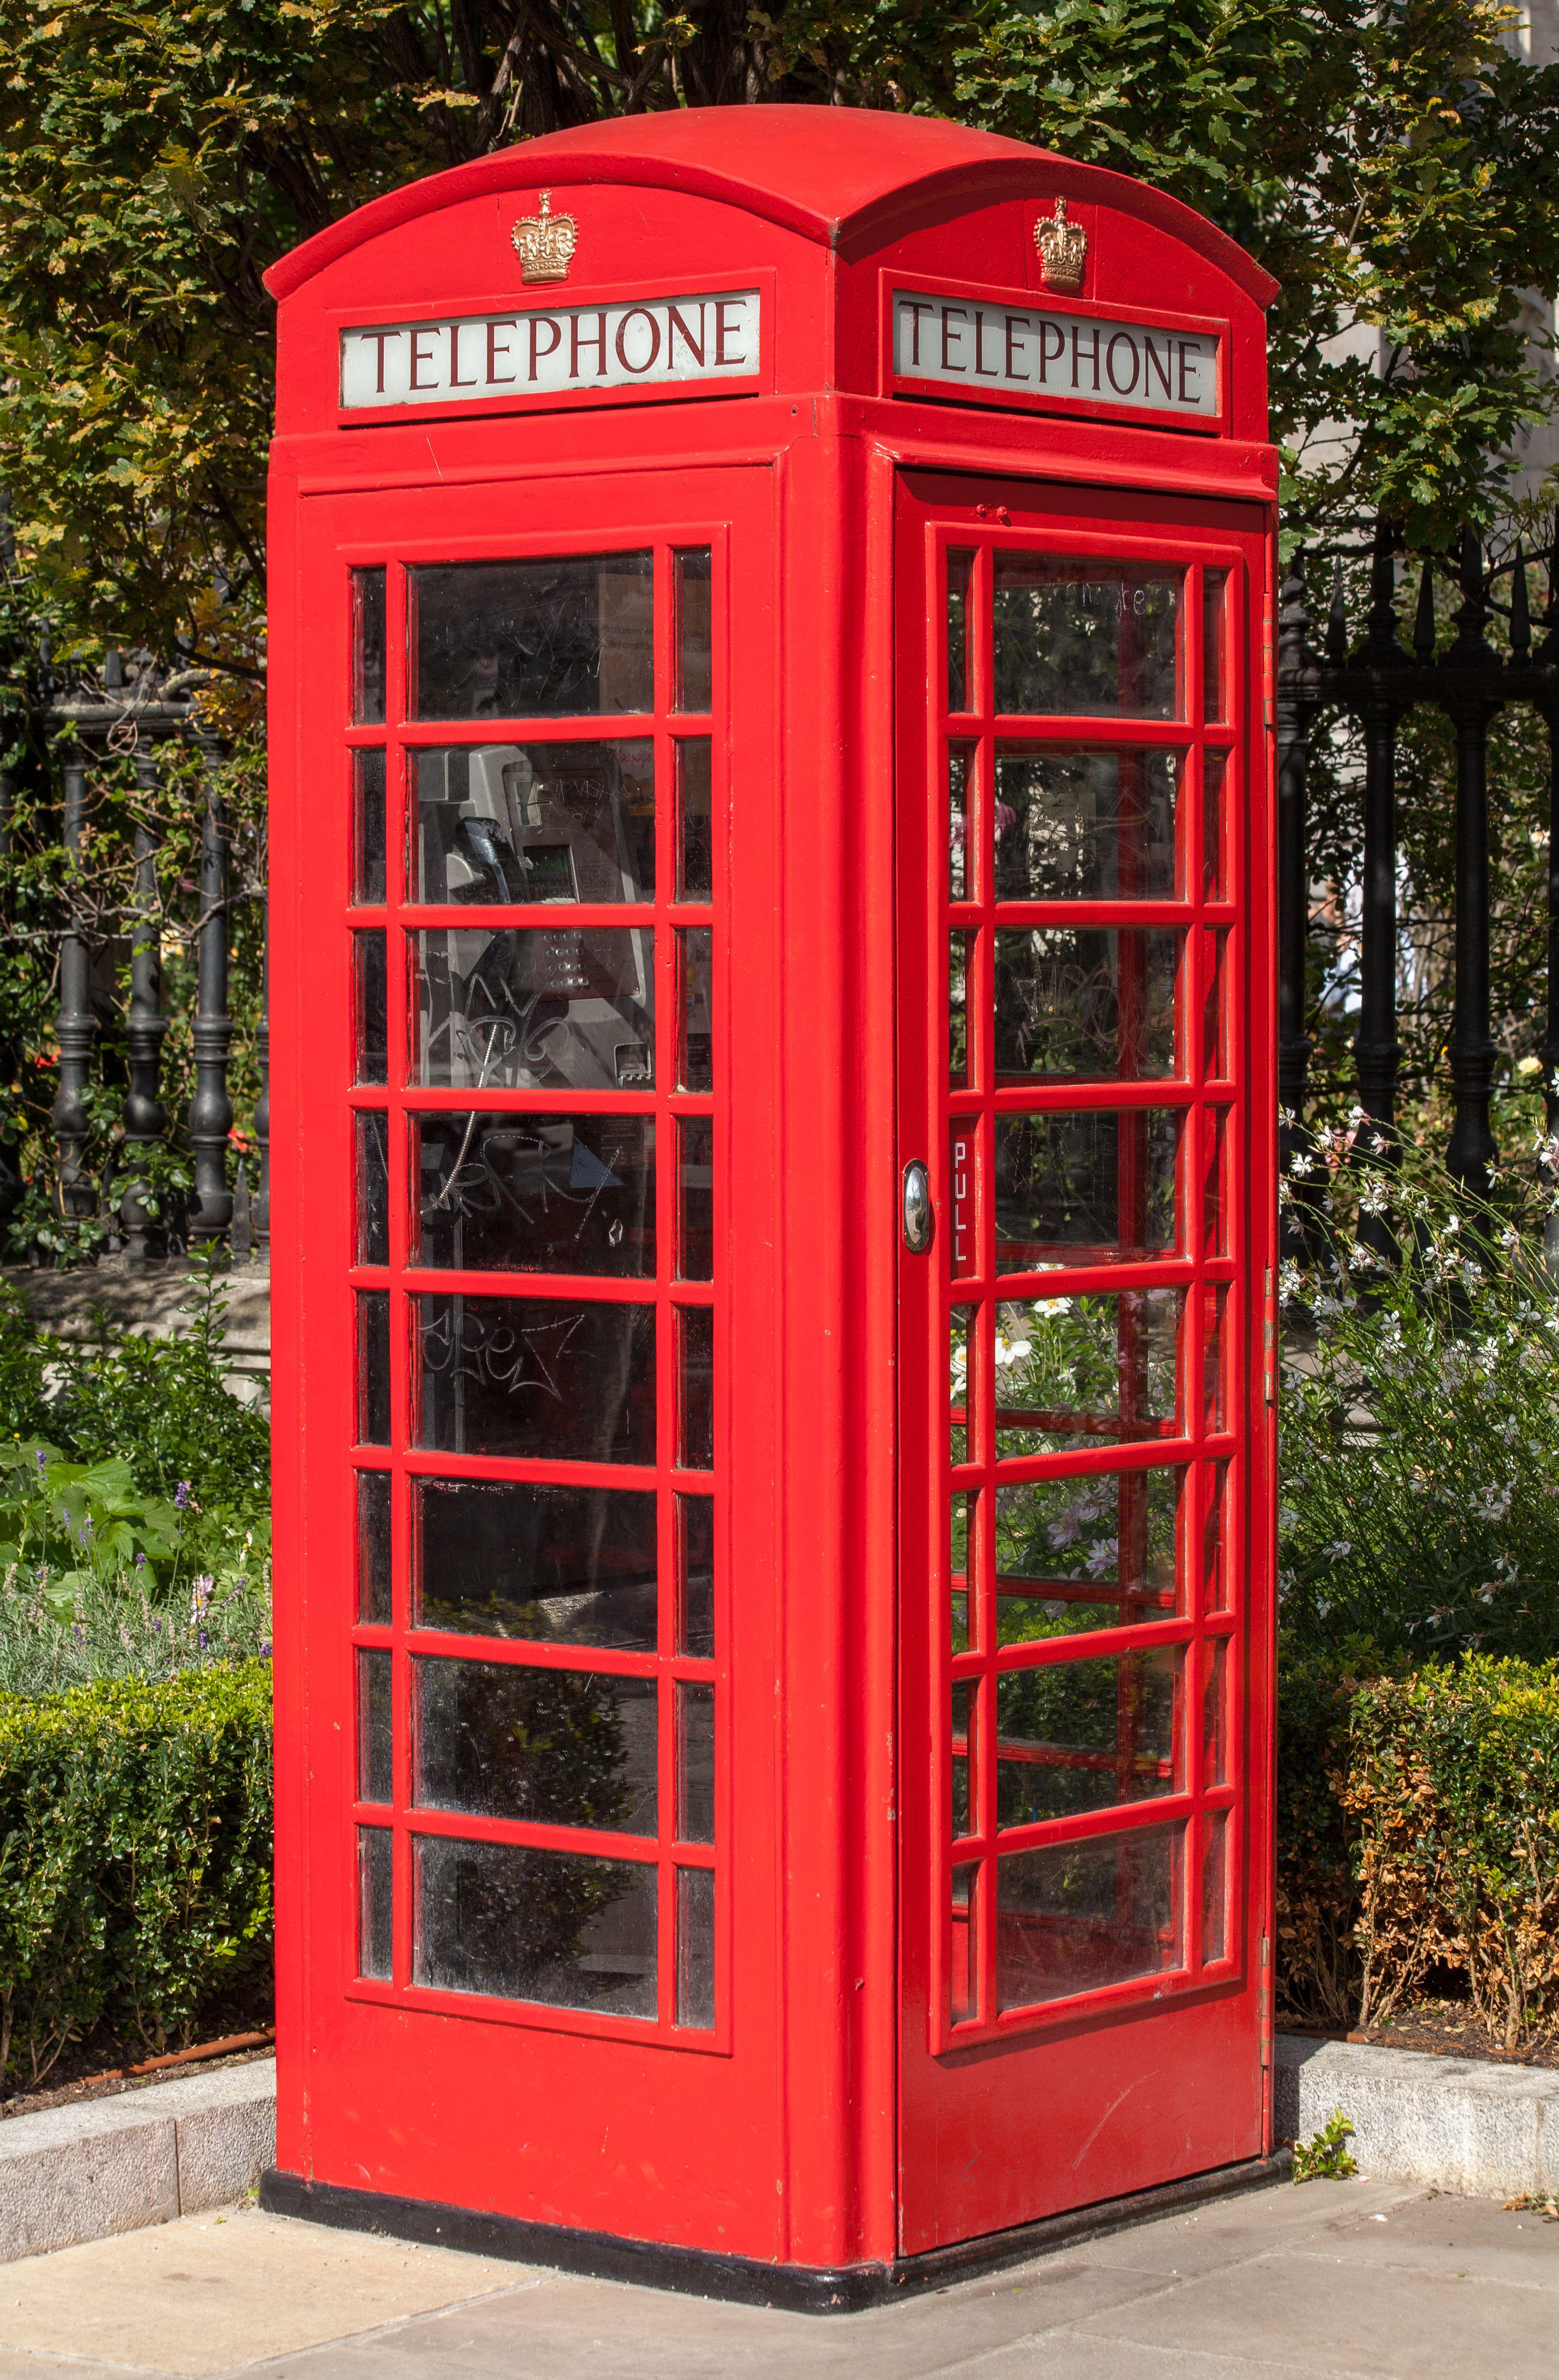 Crown Over a Red Box Logo - Red telephone box